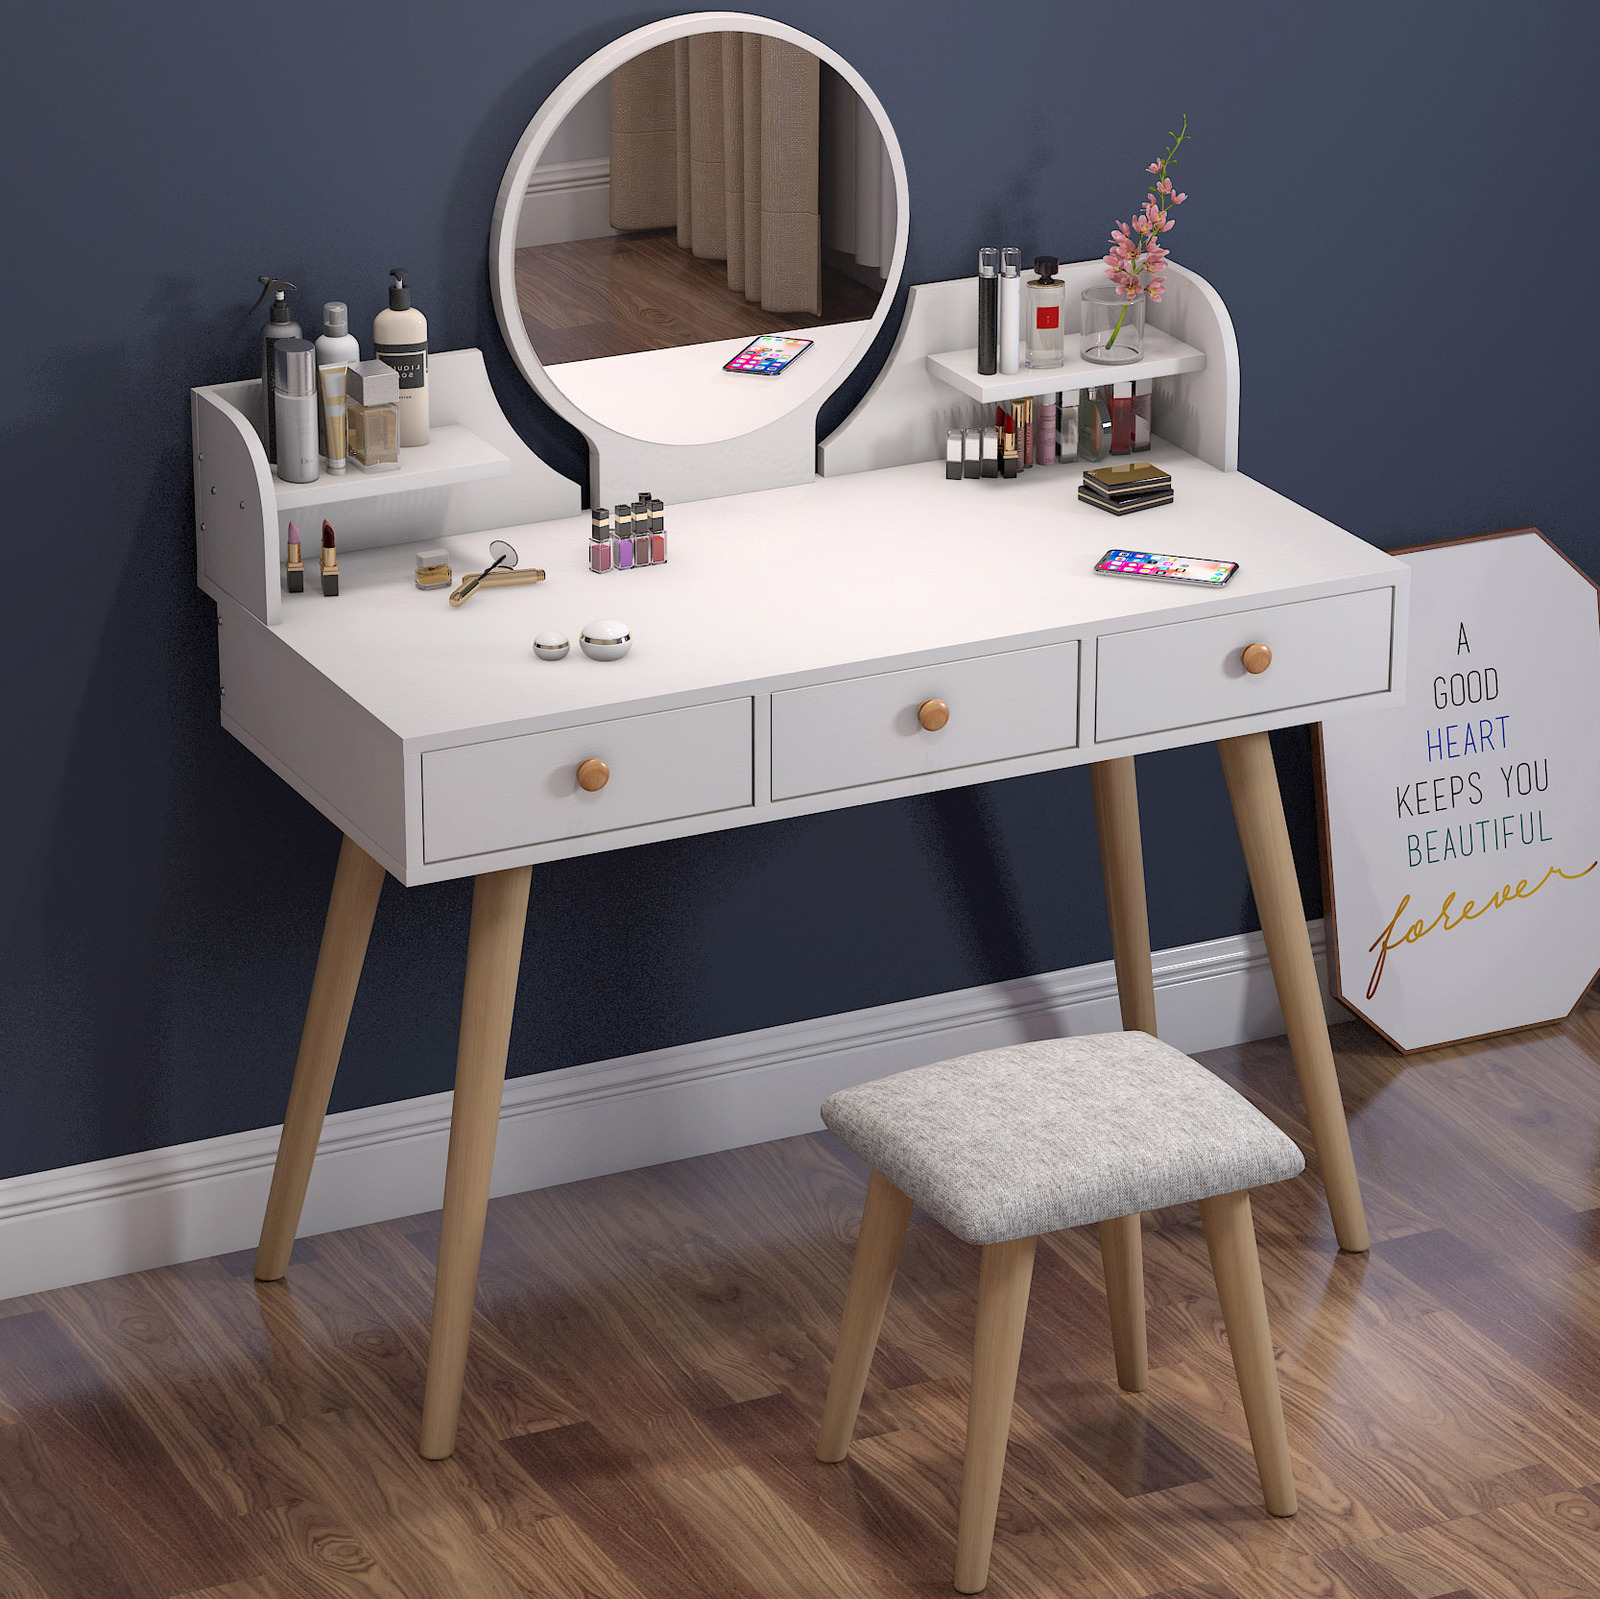 Queen Large Dresser Vanity Table With, White Dresser And Vanity Set